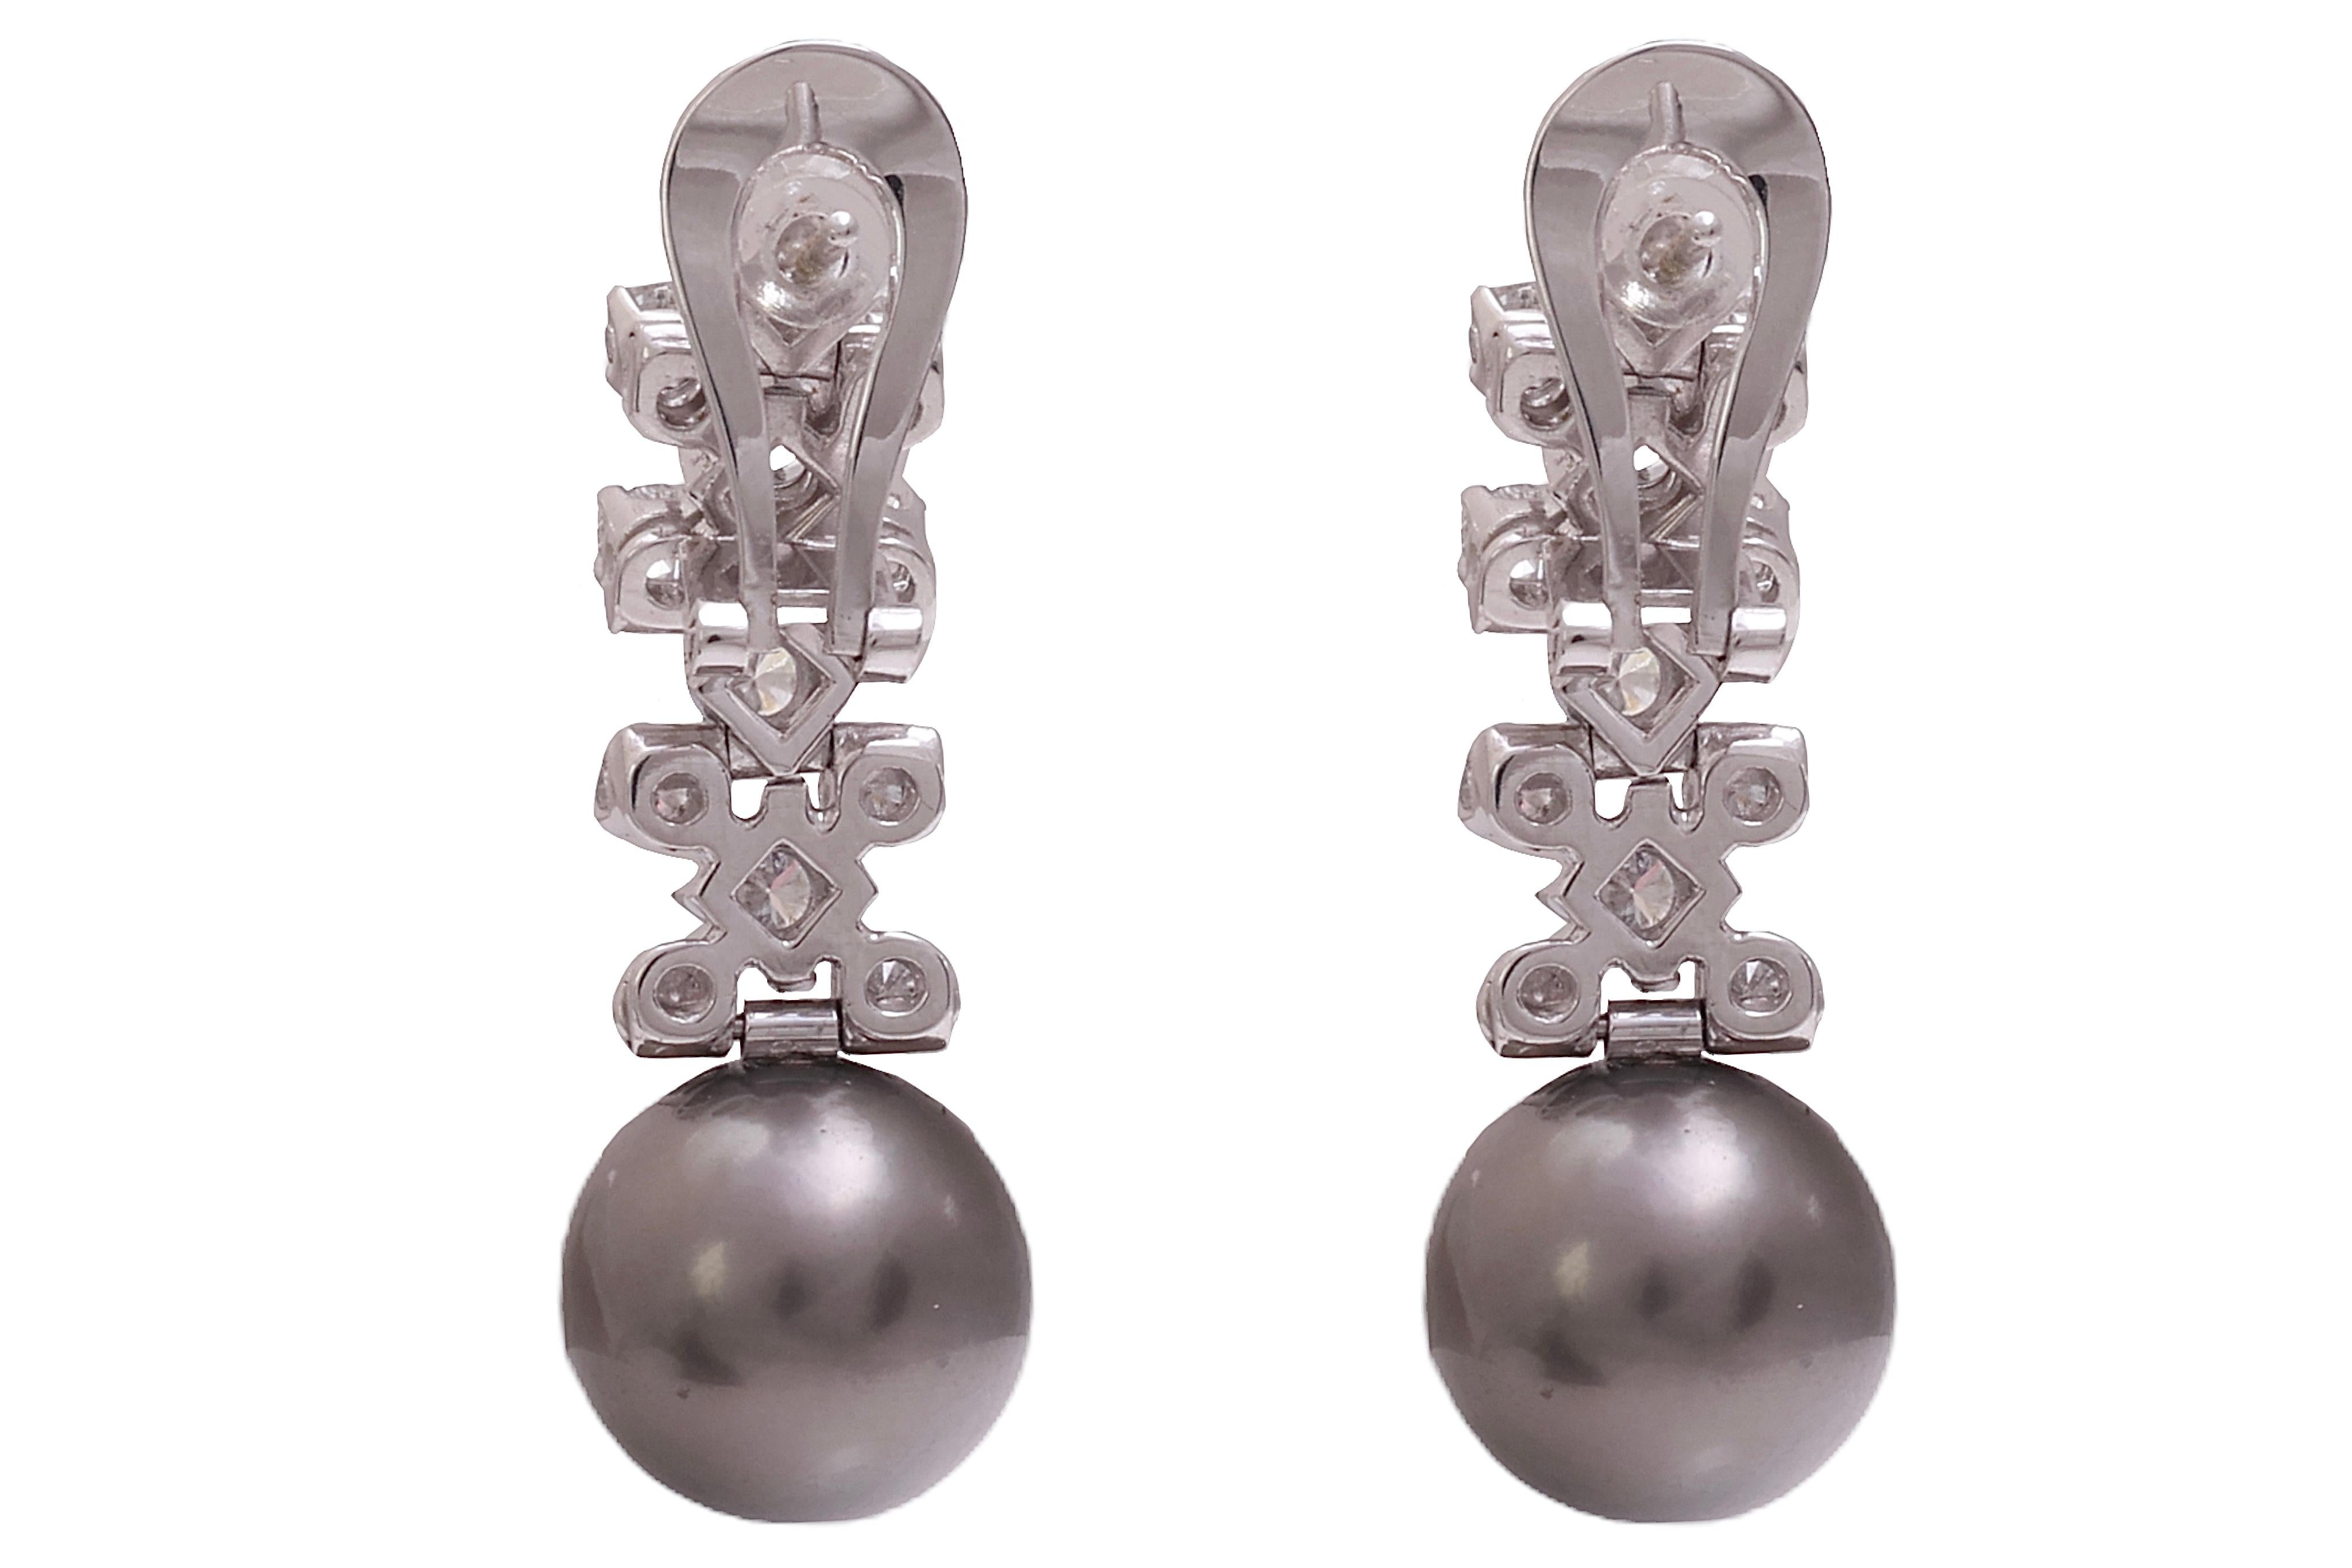 Brilliant Cut 18kt White Gold Clip - On Earrings With 2.32 ct. Diamonds & Tahiti Pearls For Sale